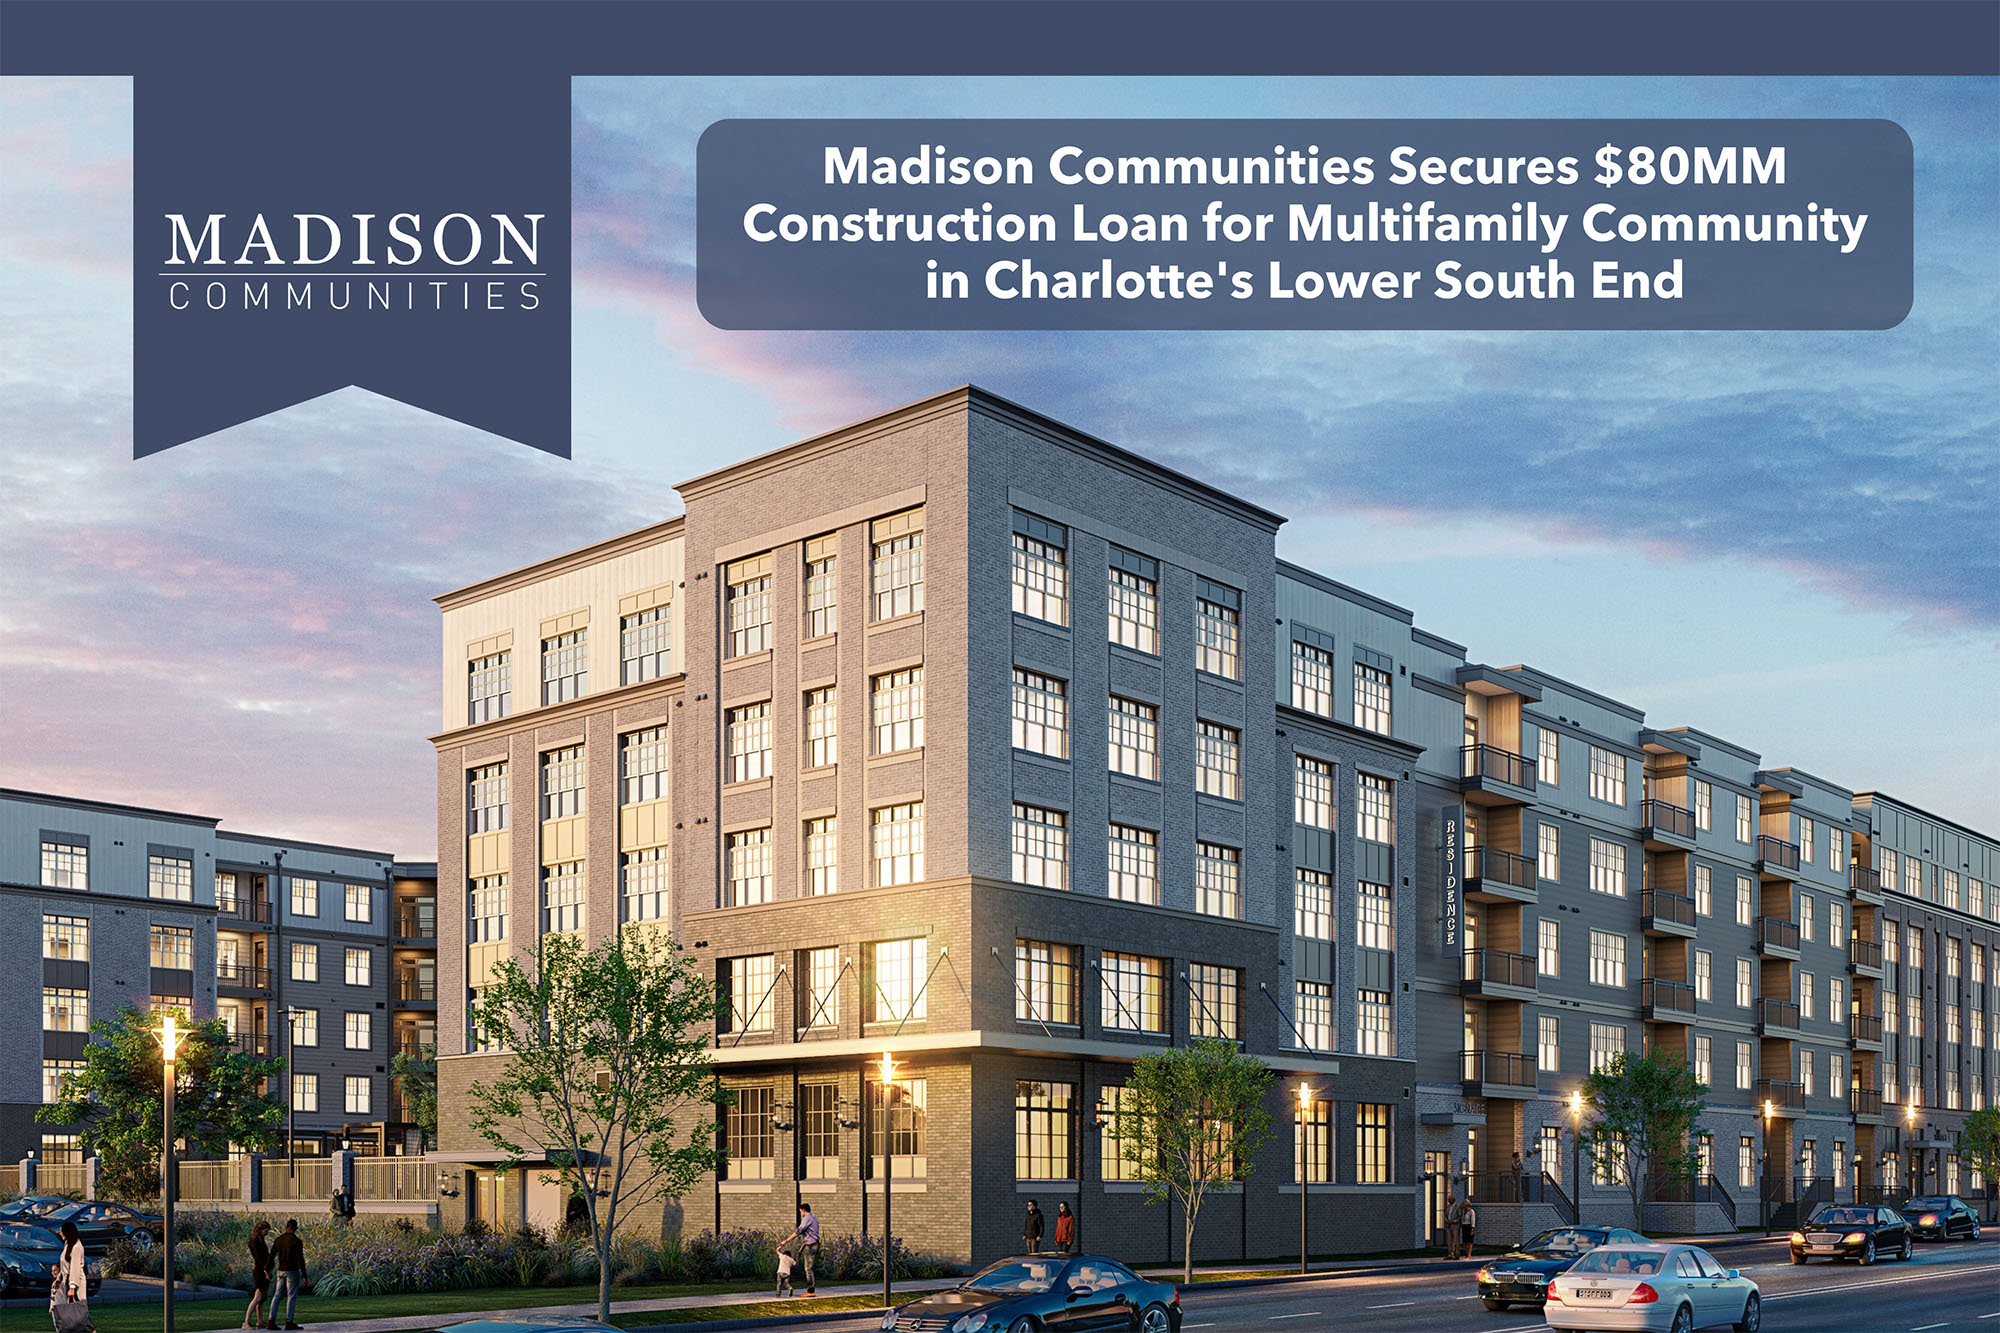 Madison Communities Secures $80MM Construction Loan for Multifamily Community in Charlotte's Lower South End